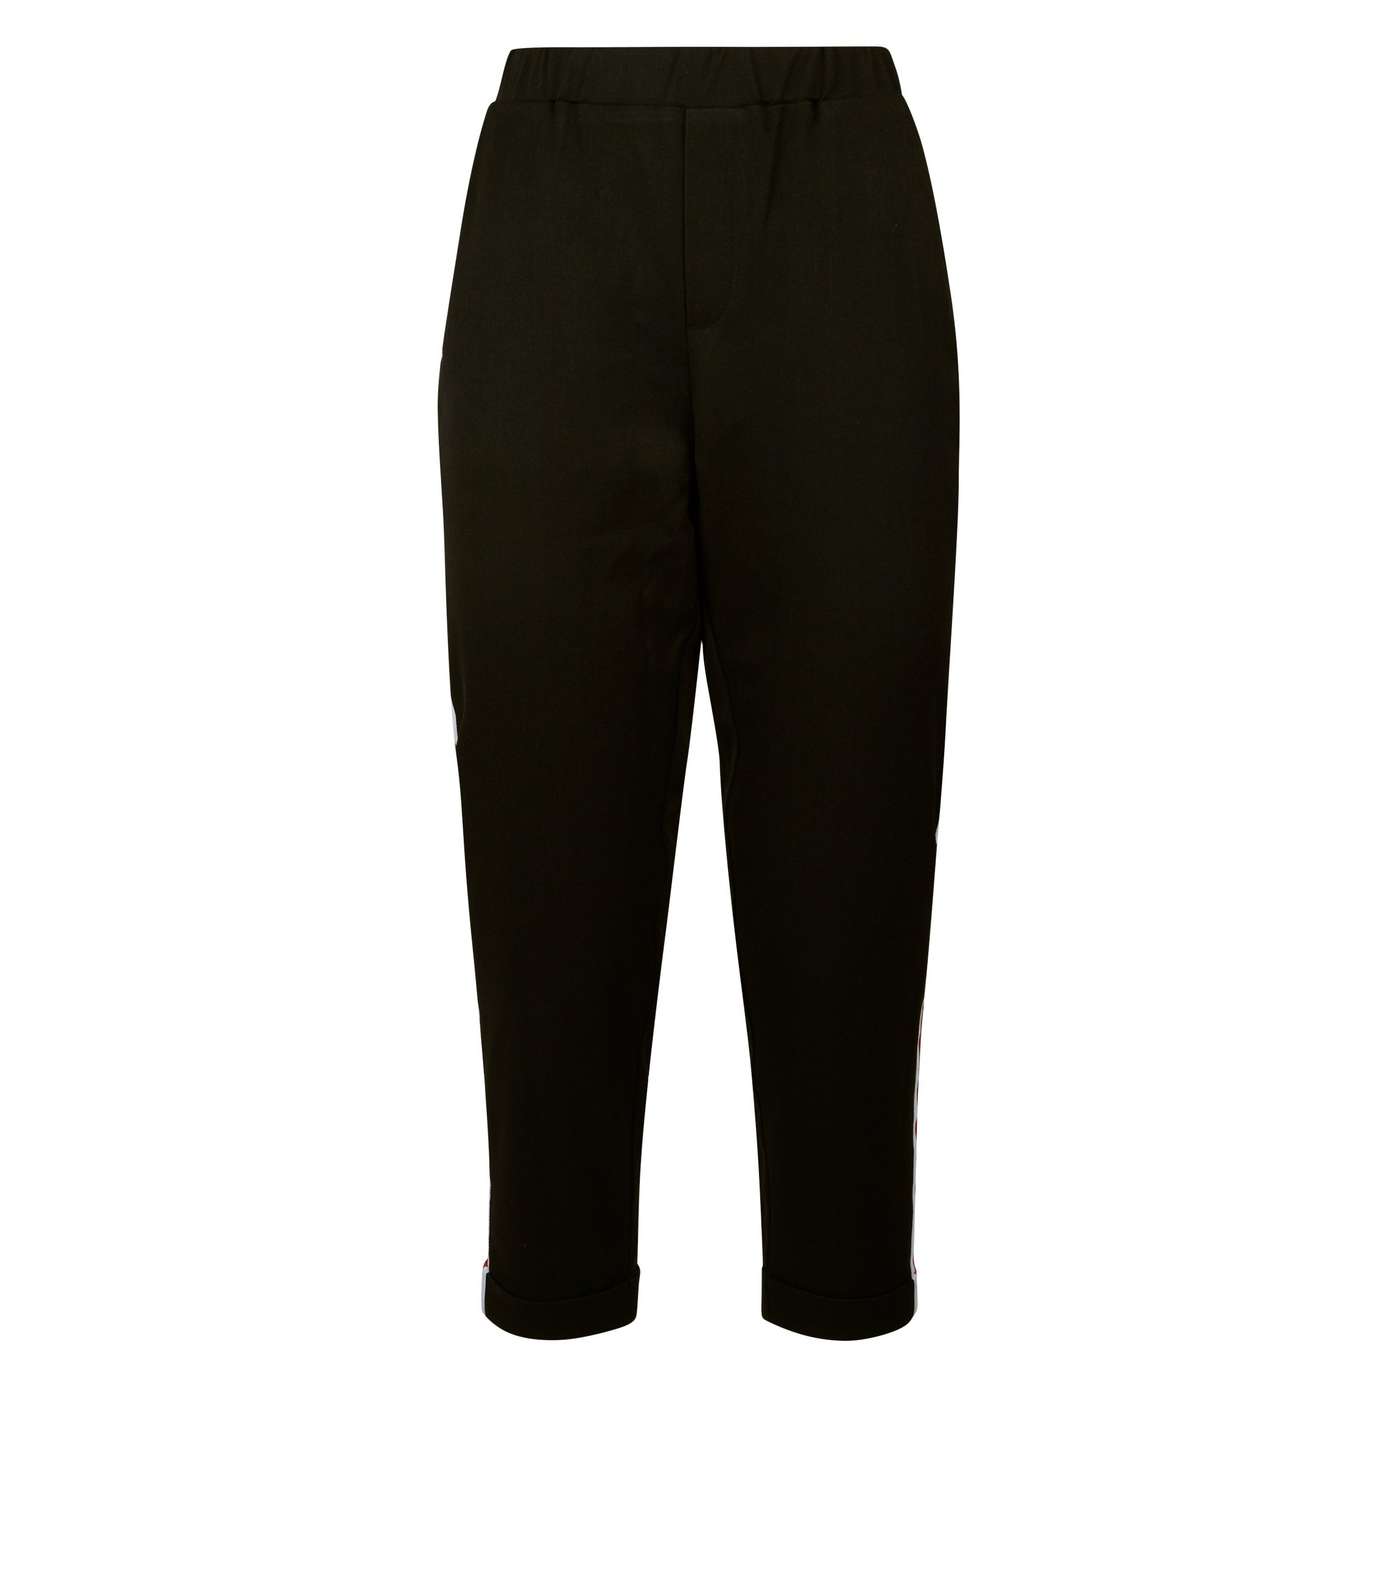 Petite Black Side Stripe Tapered Trousers  Image 4